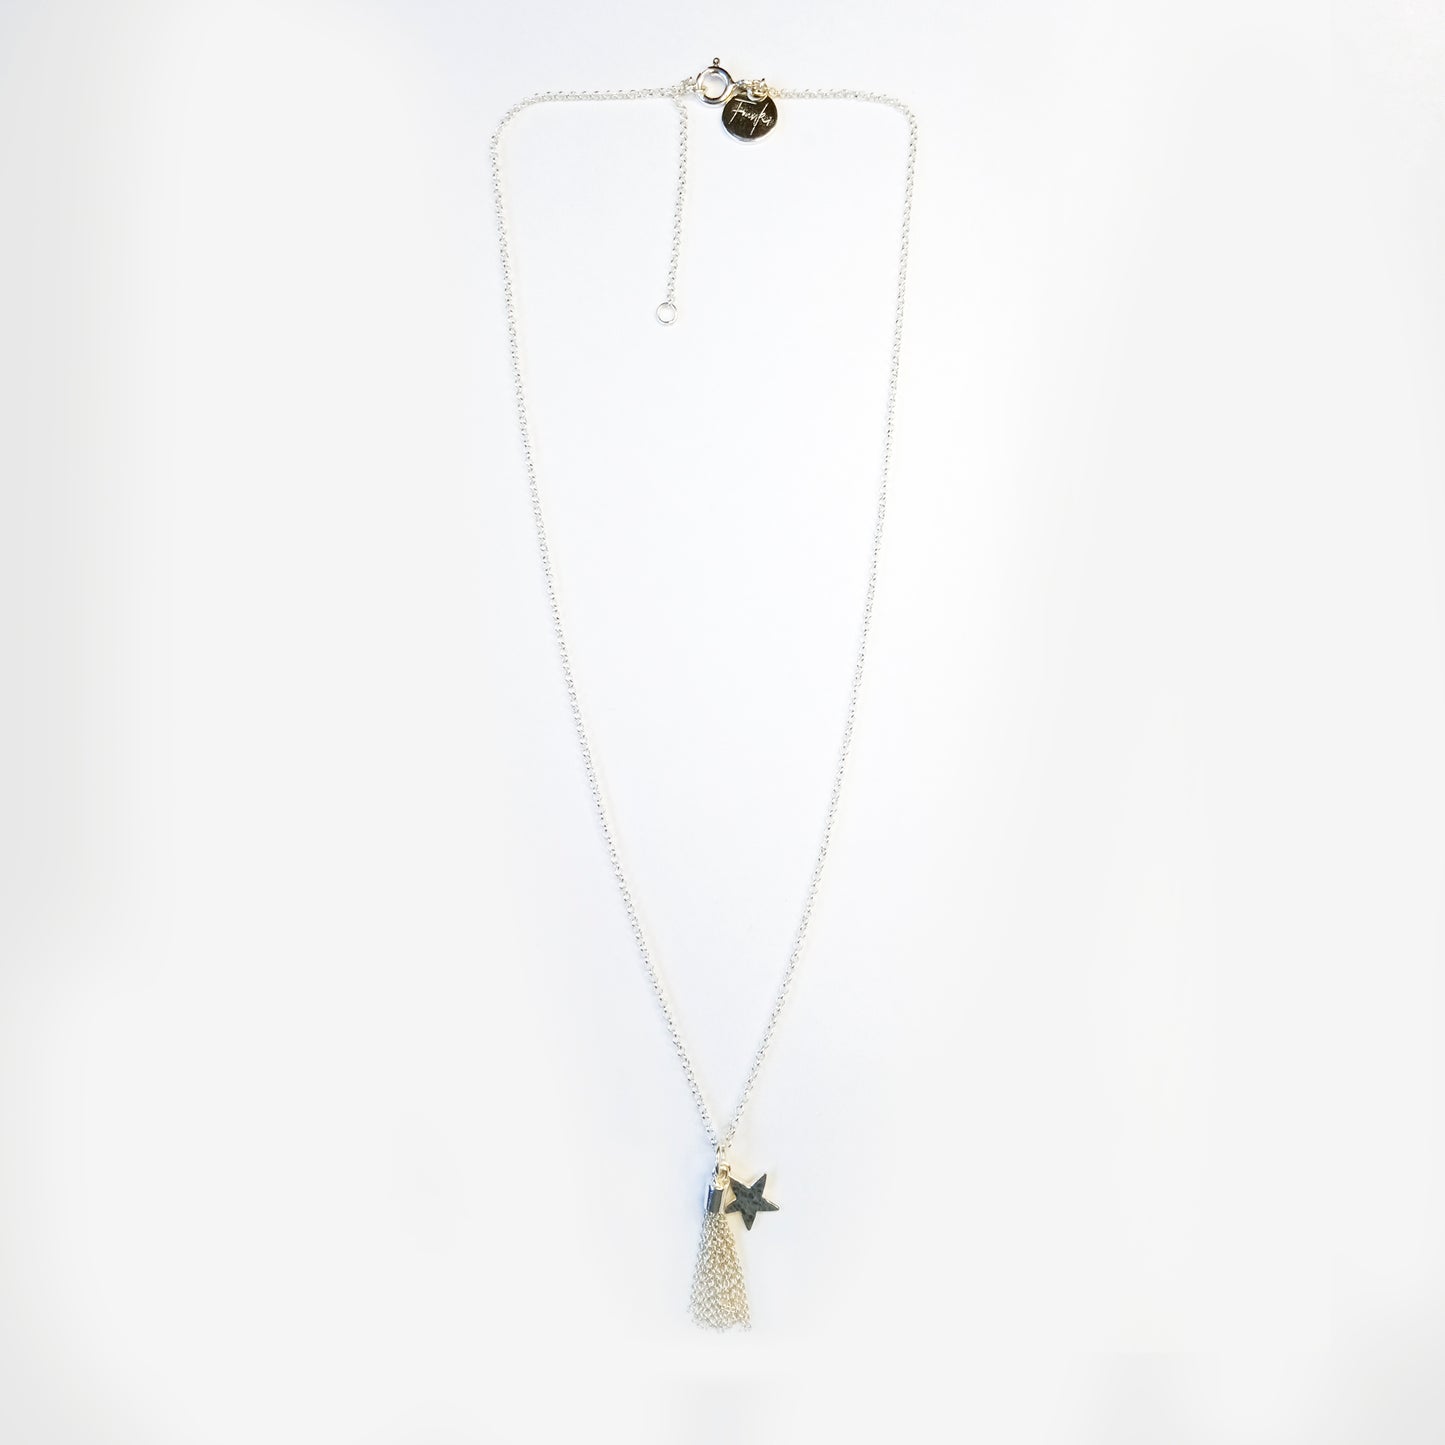 Silver 925 Shooting Star Tassle Necklace